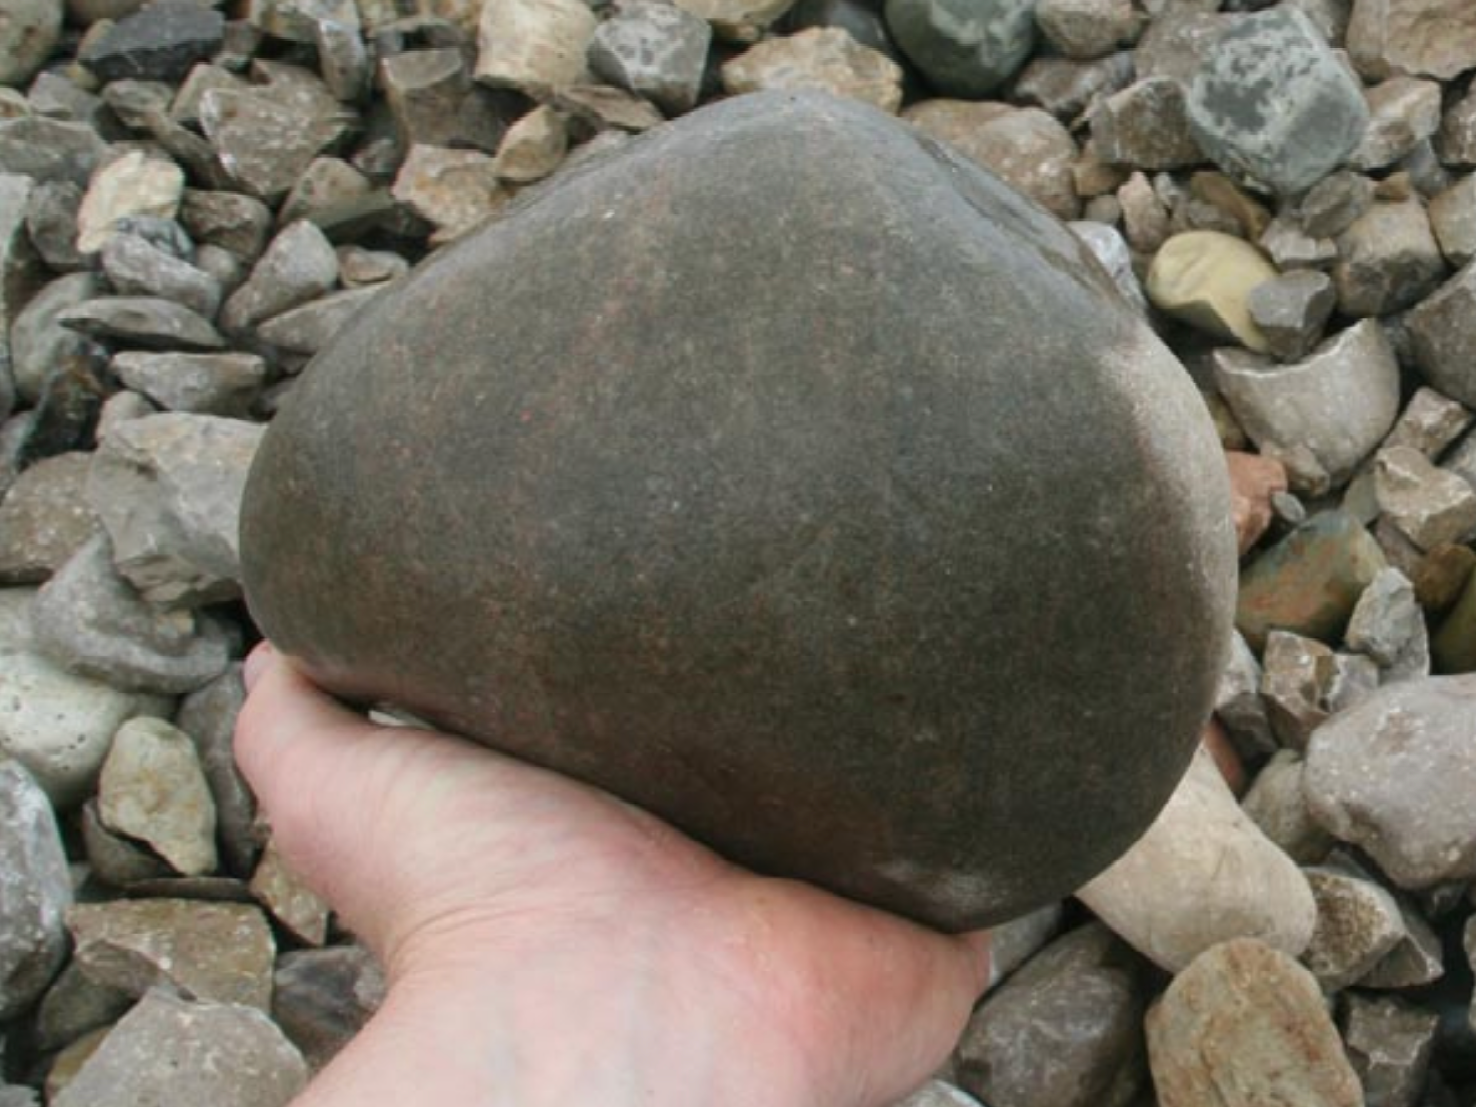 a person is holding a large rock in their hand